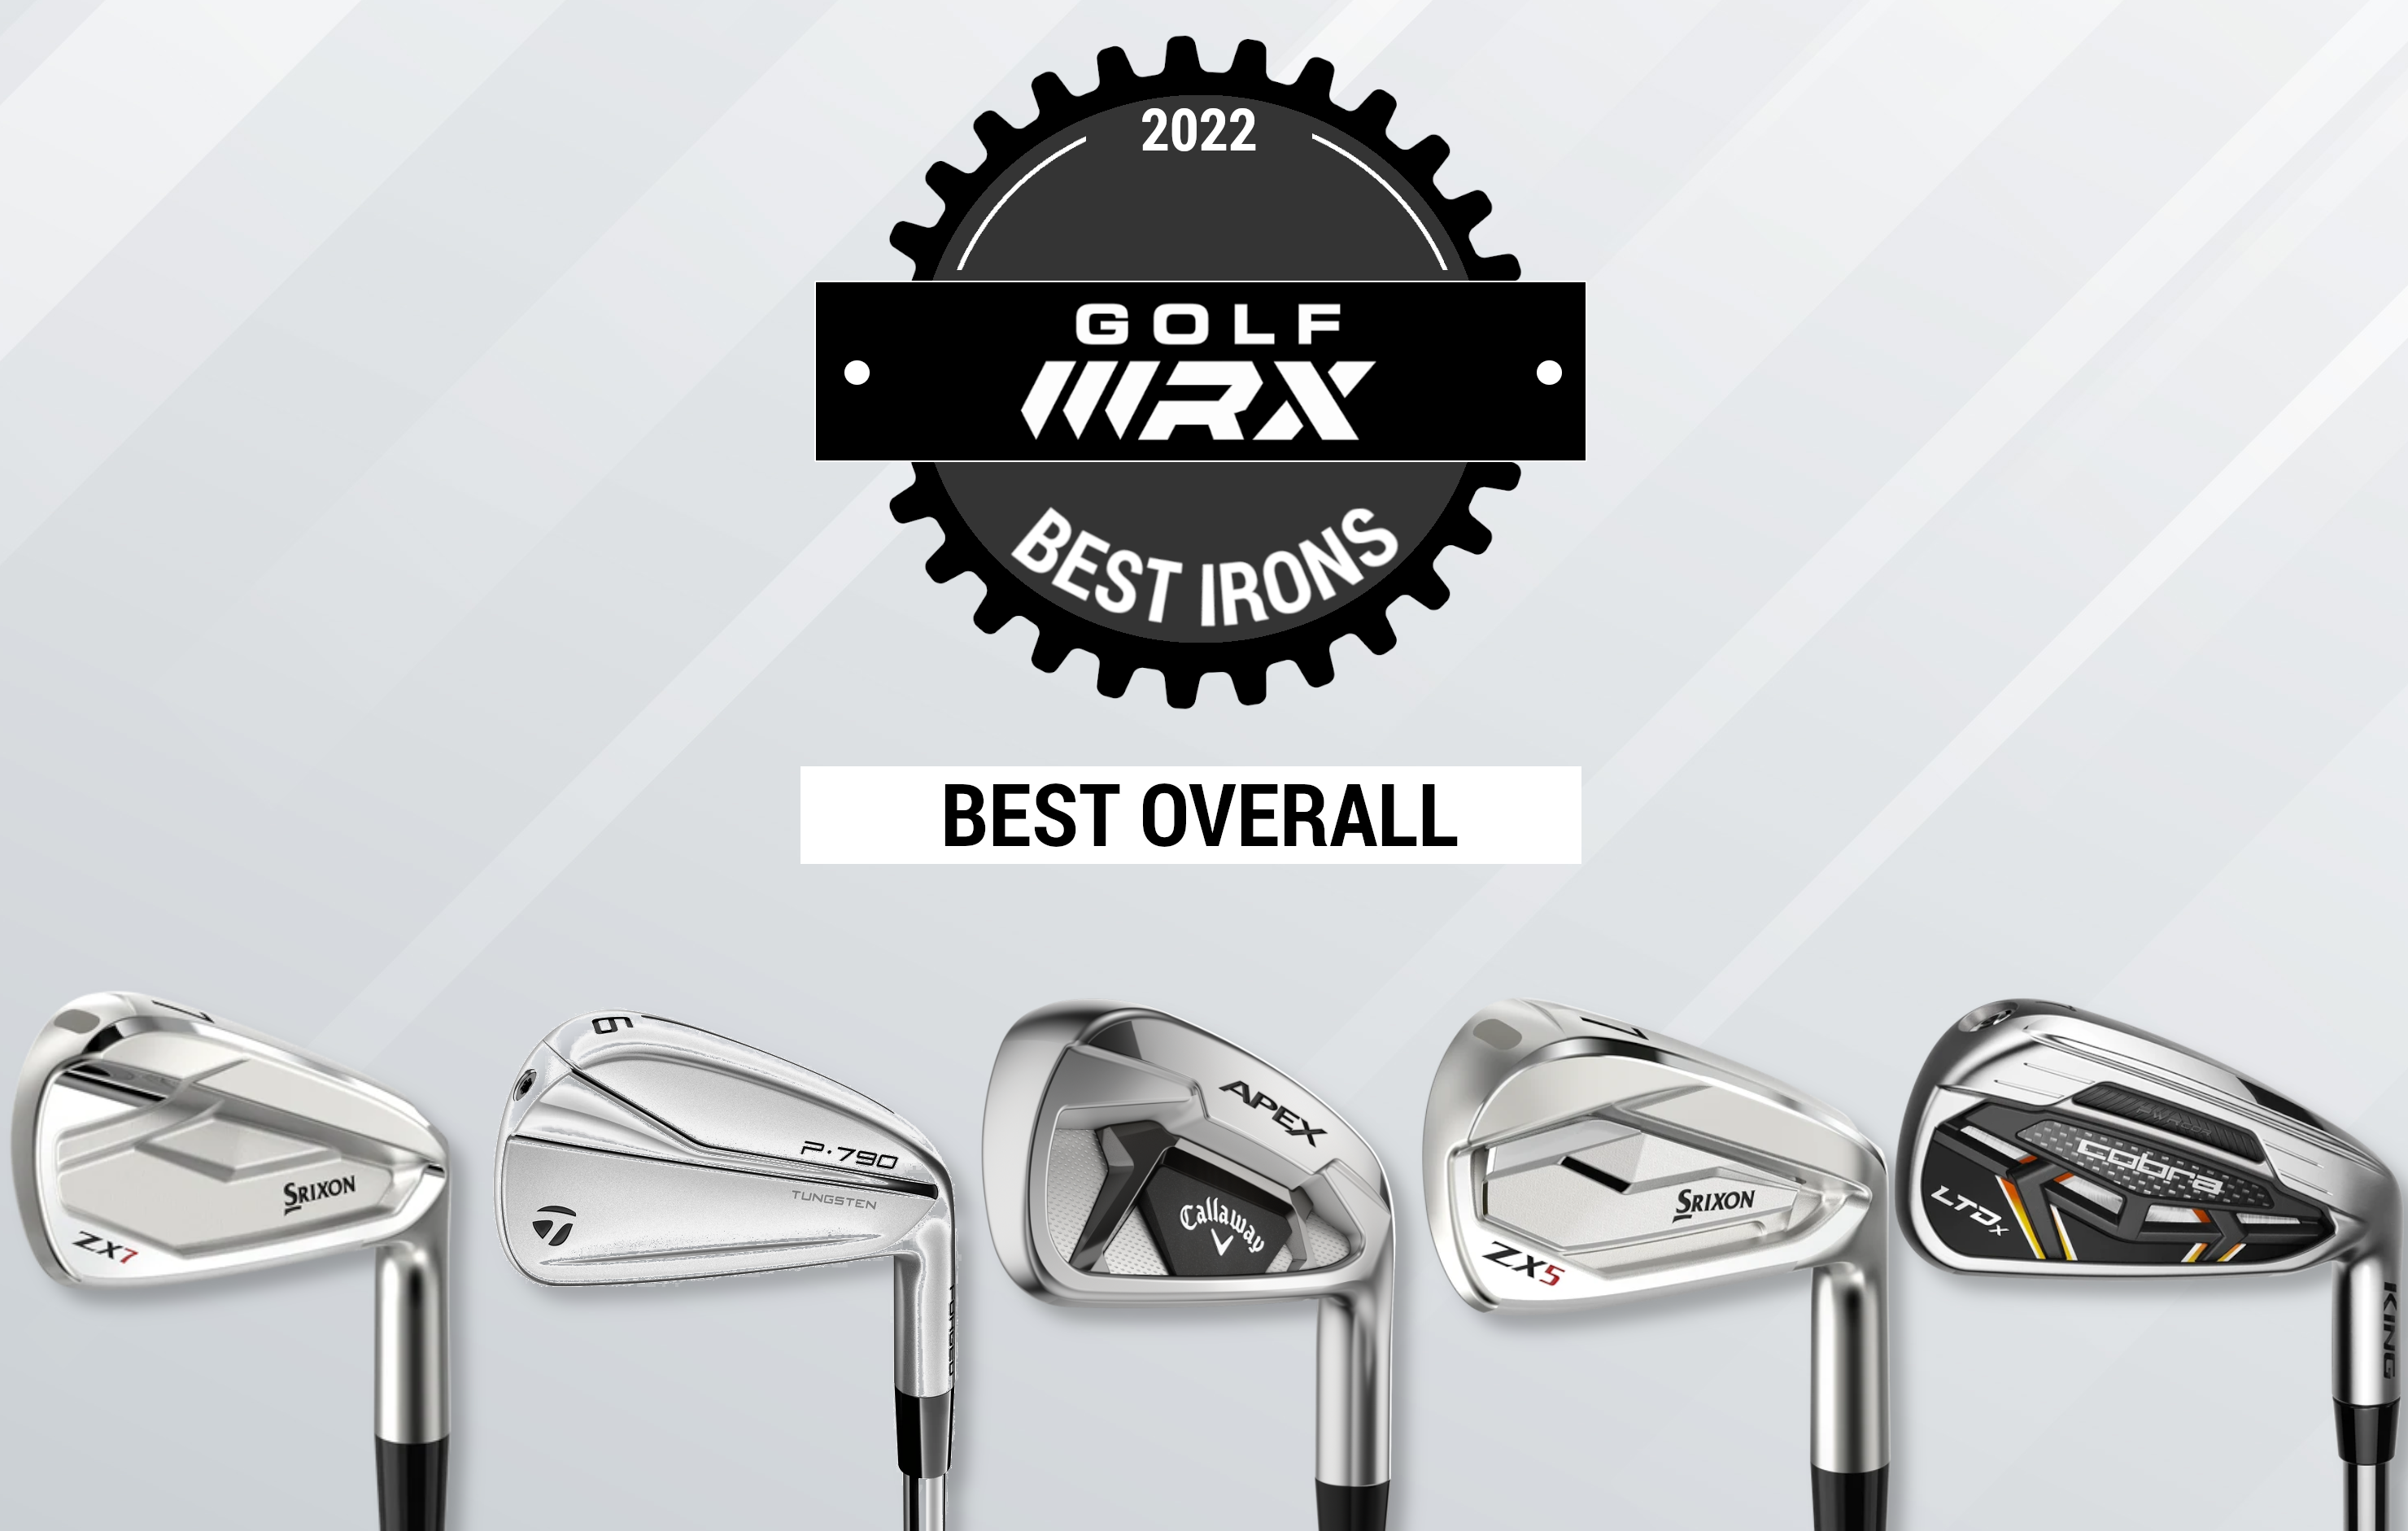 https://www.golfwrx.com/wp-content/uploads/2022/04/Best-Irons-Featured-IMG_Best-Overall-Final.xcf.png